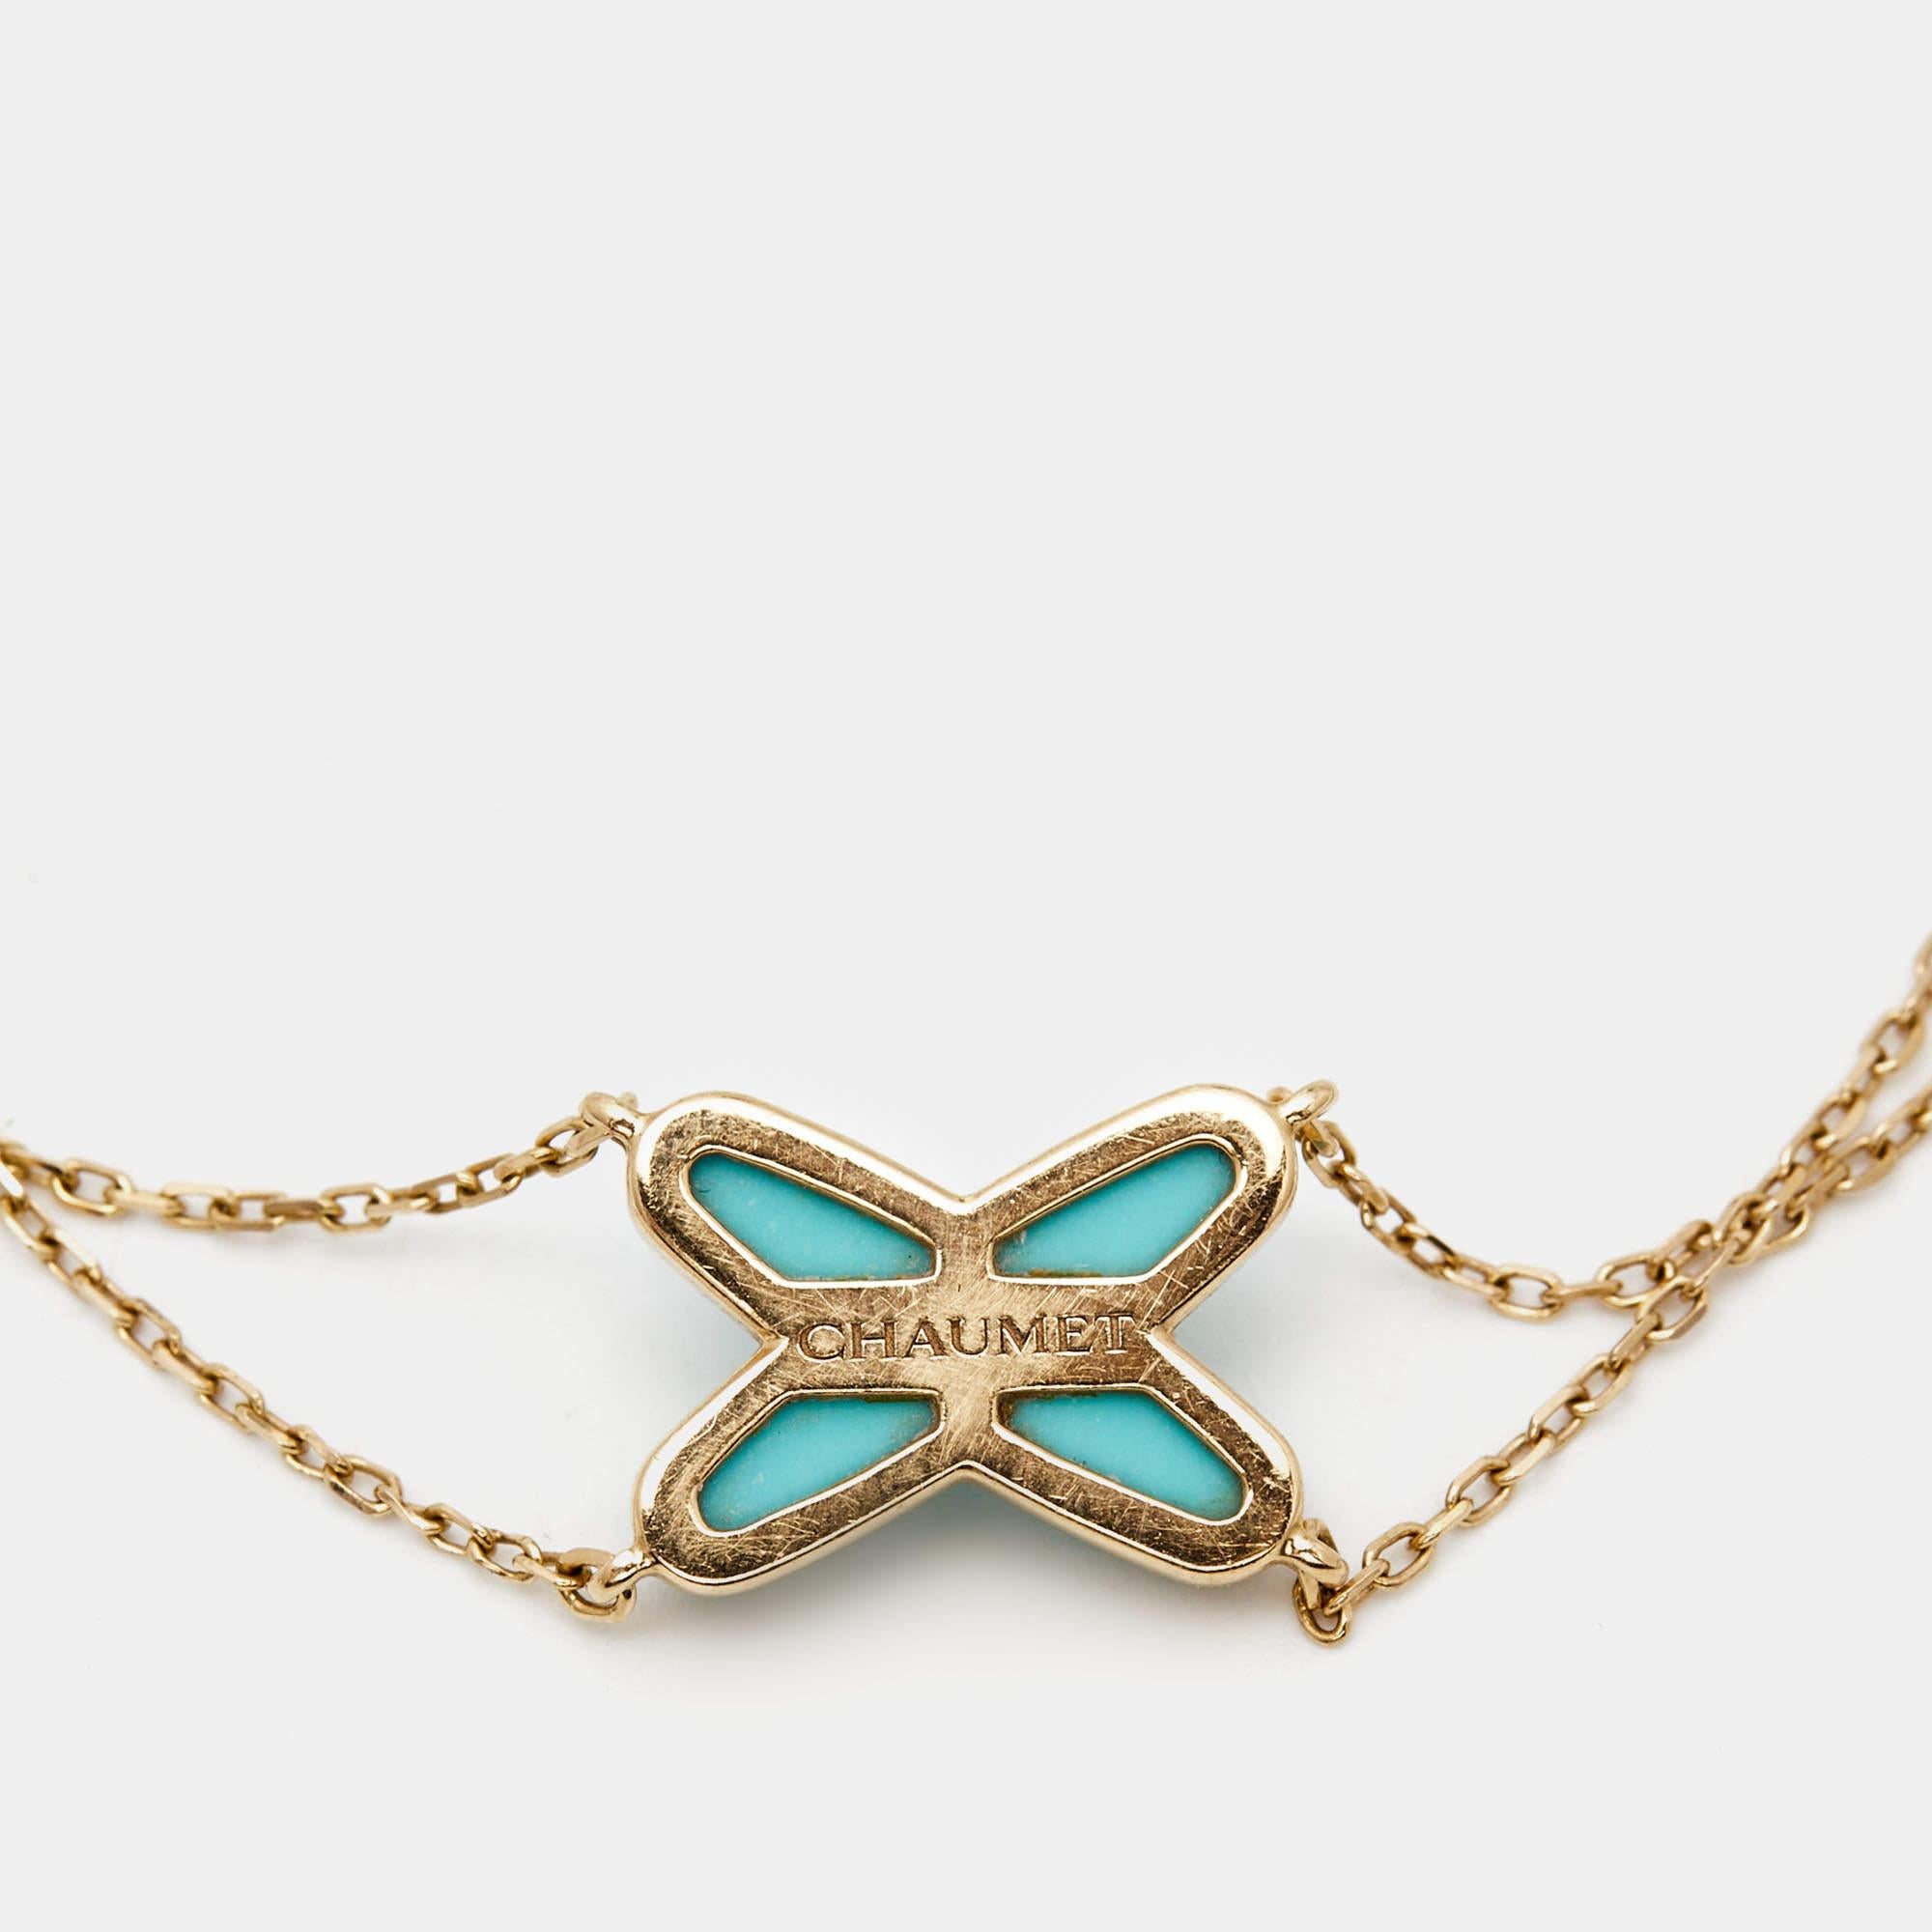 This gorgeous Chaumet bracelet has been created by skilled craftsmen to be a cherishable accessory. The Jeux de Liens bracelet is sculpted using 18k rose gold and designed with double chains that hold the signature ''X' motif inlaid with turquoise